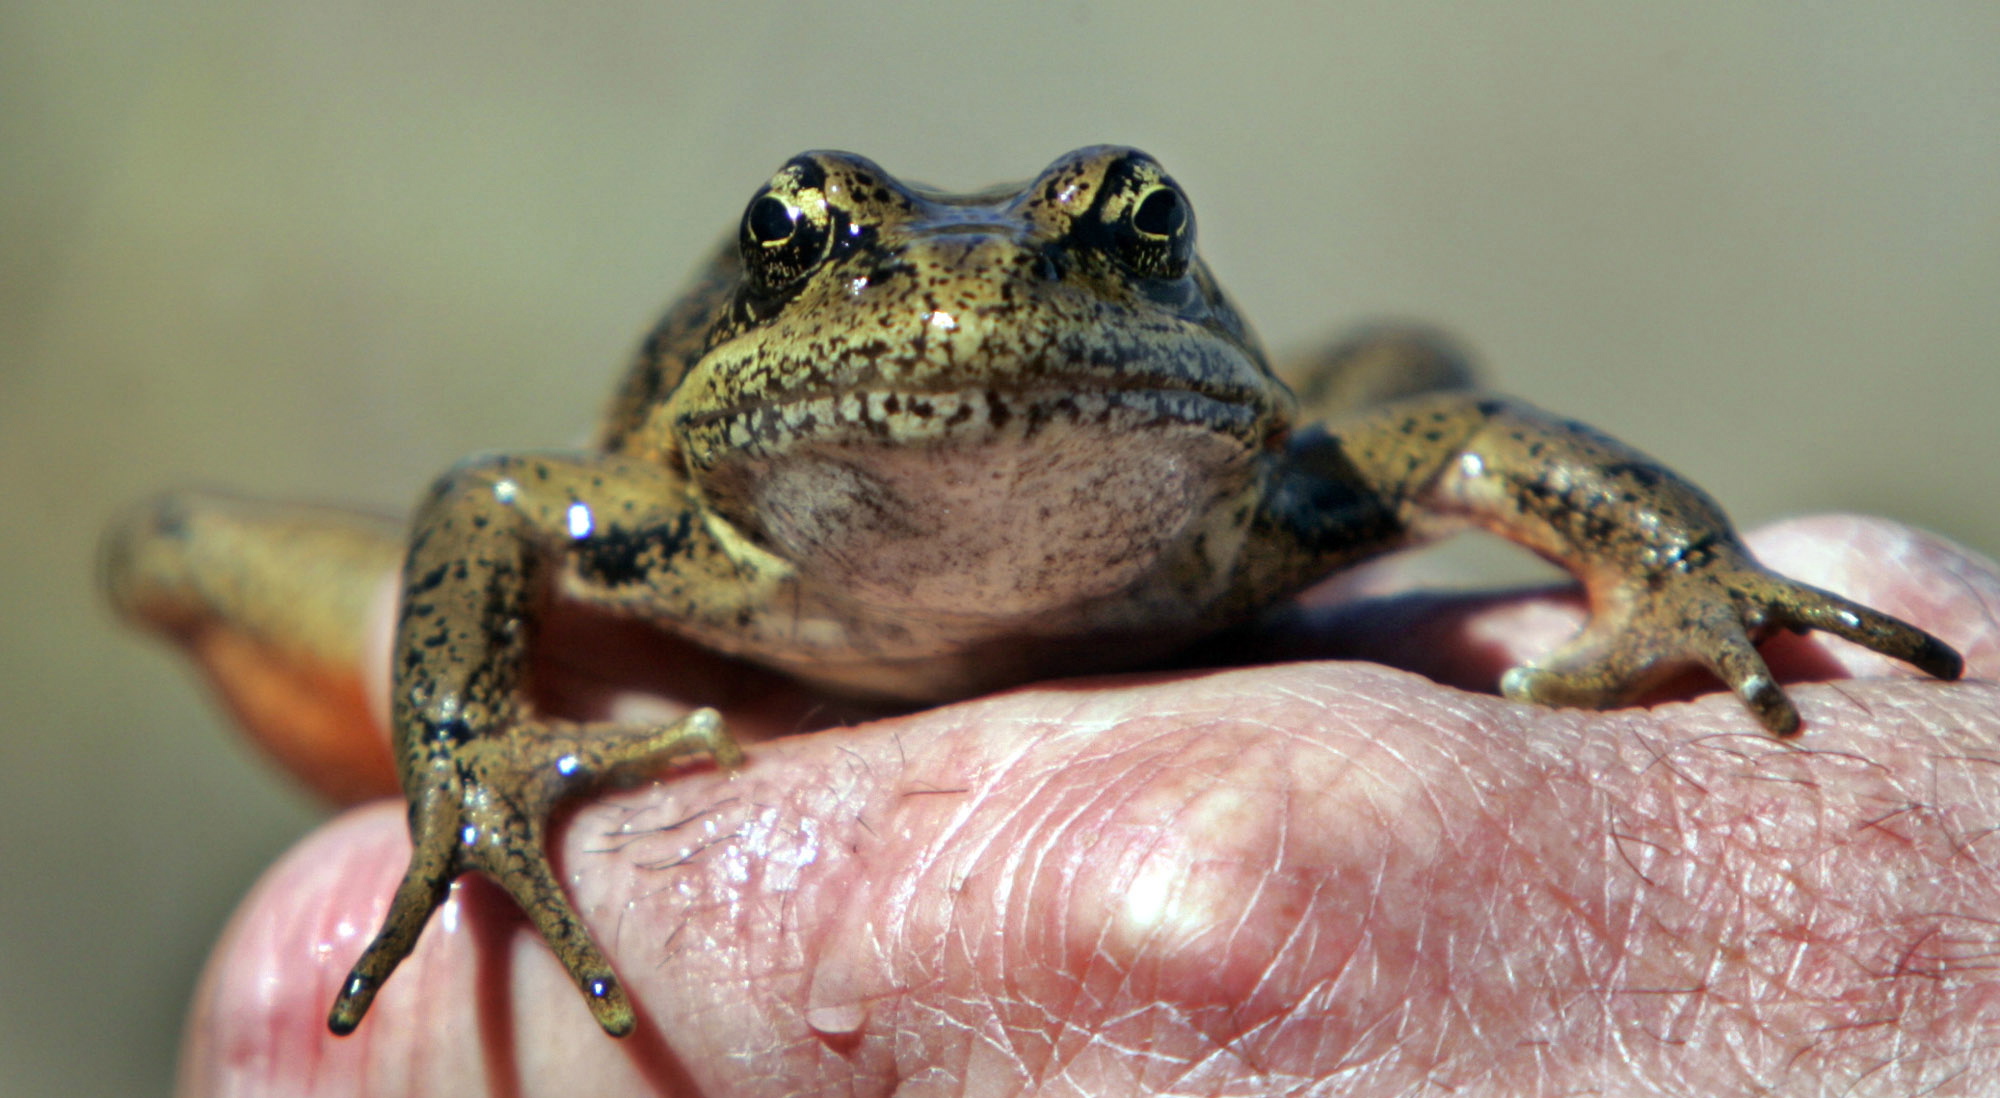 This April 19, 2005 file photo shows a red-legged frog being displayed for visitors after being captured by a Forest Service ecologist in a pond at the Mount St.